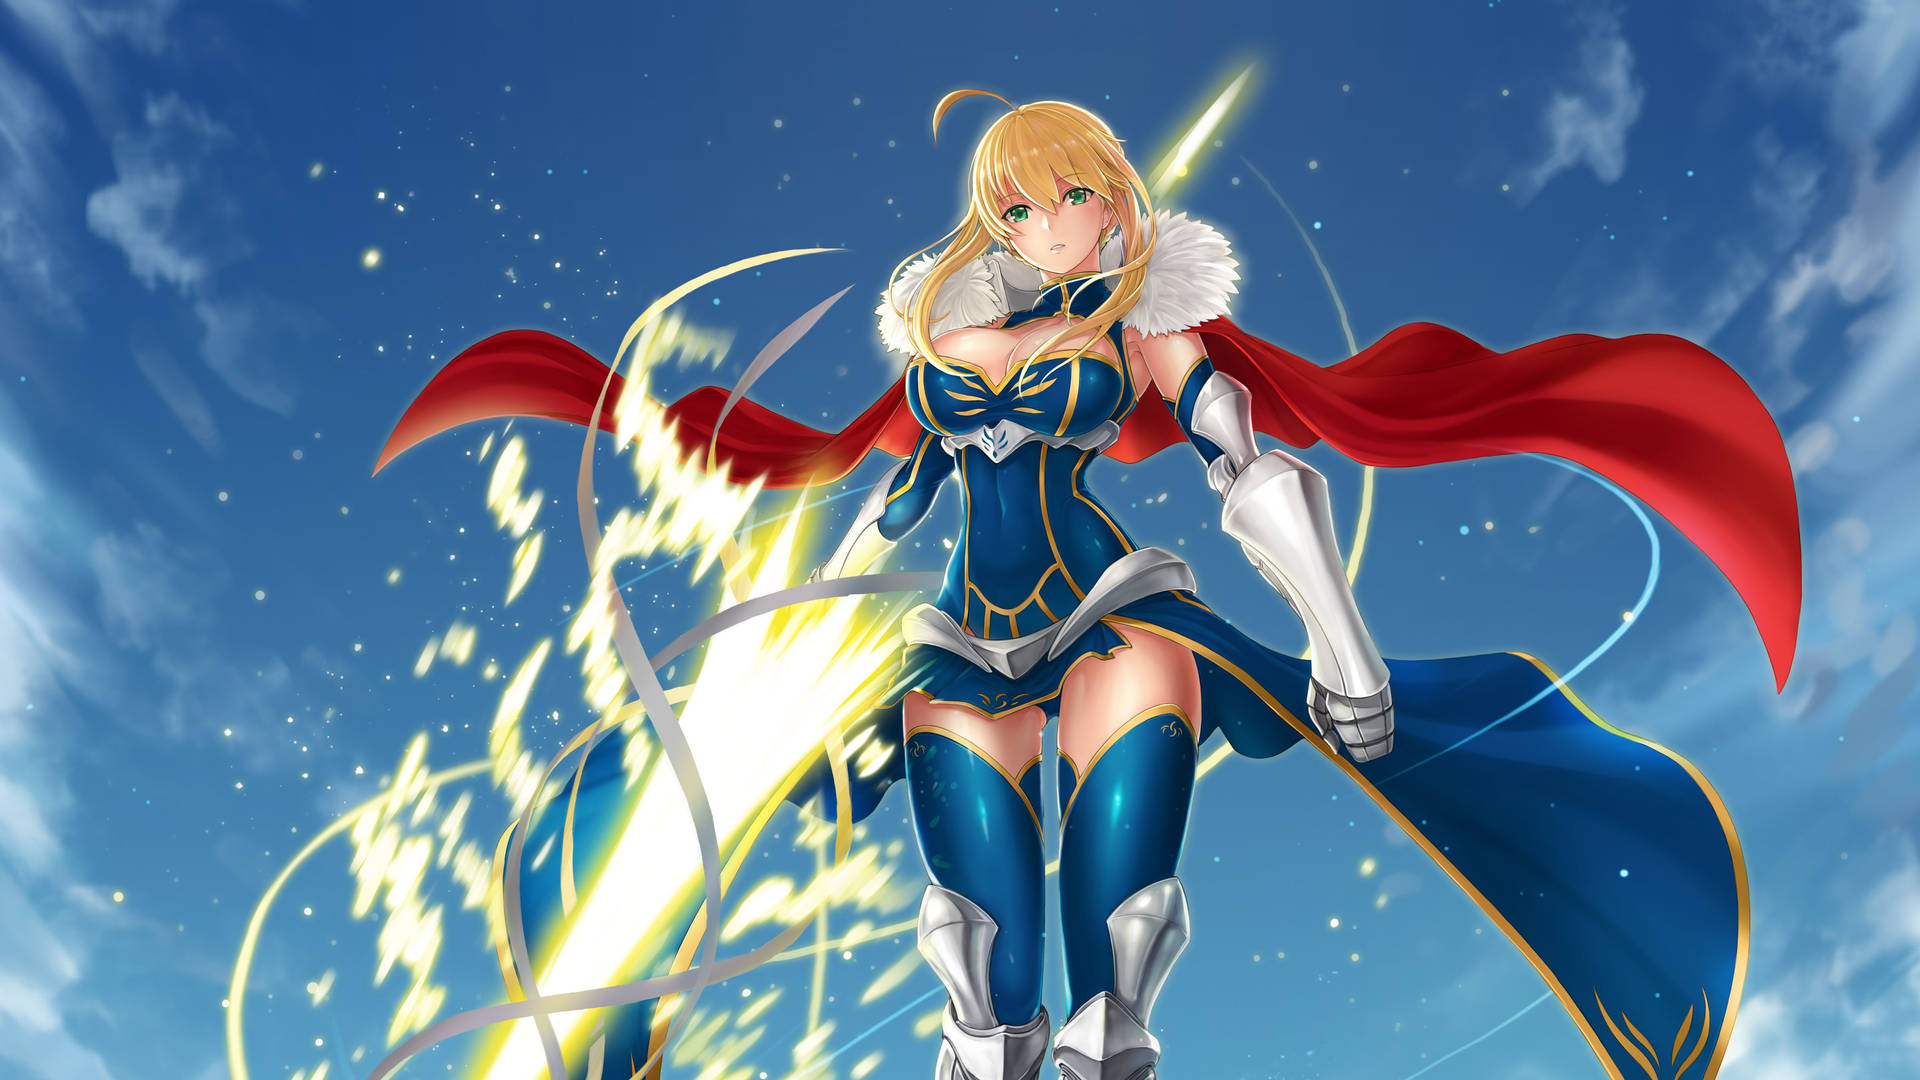 Saber Of Fate Releasing Light